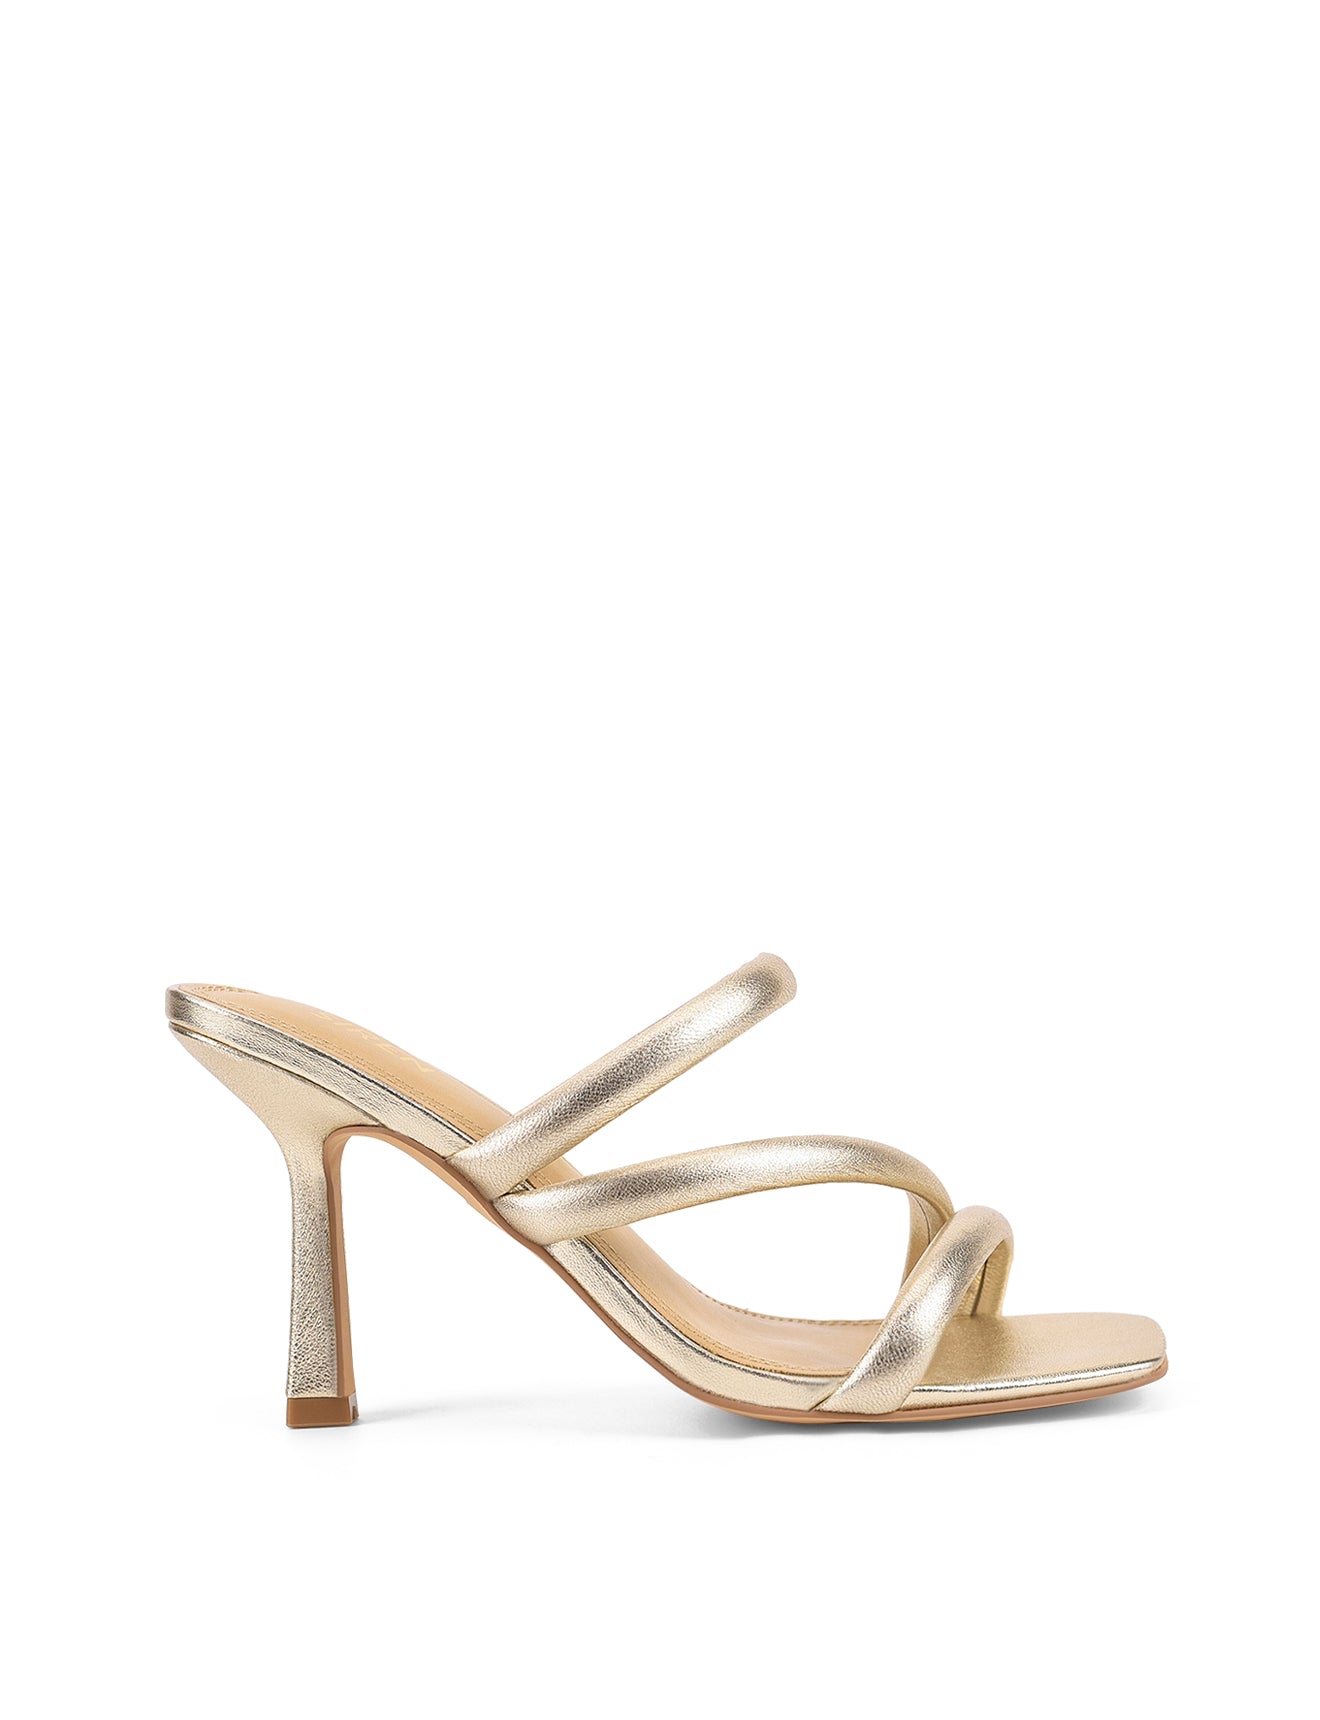 Spence Heeled Sandals - Gold Metallic Leather